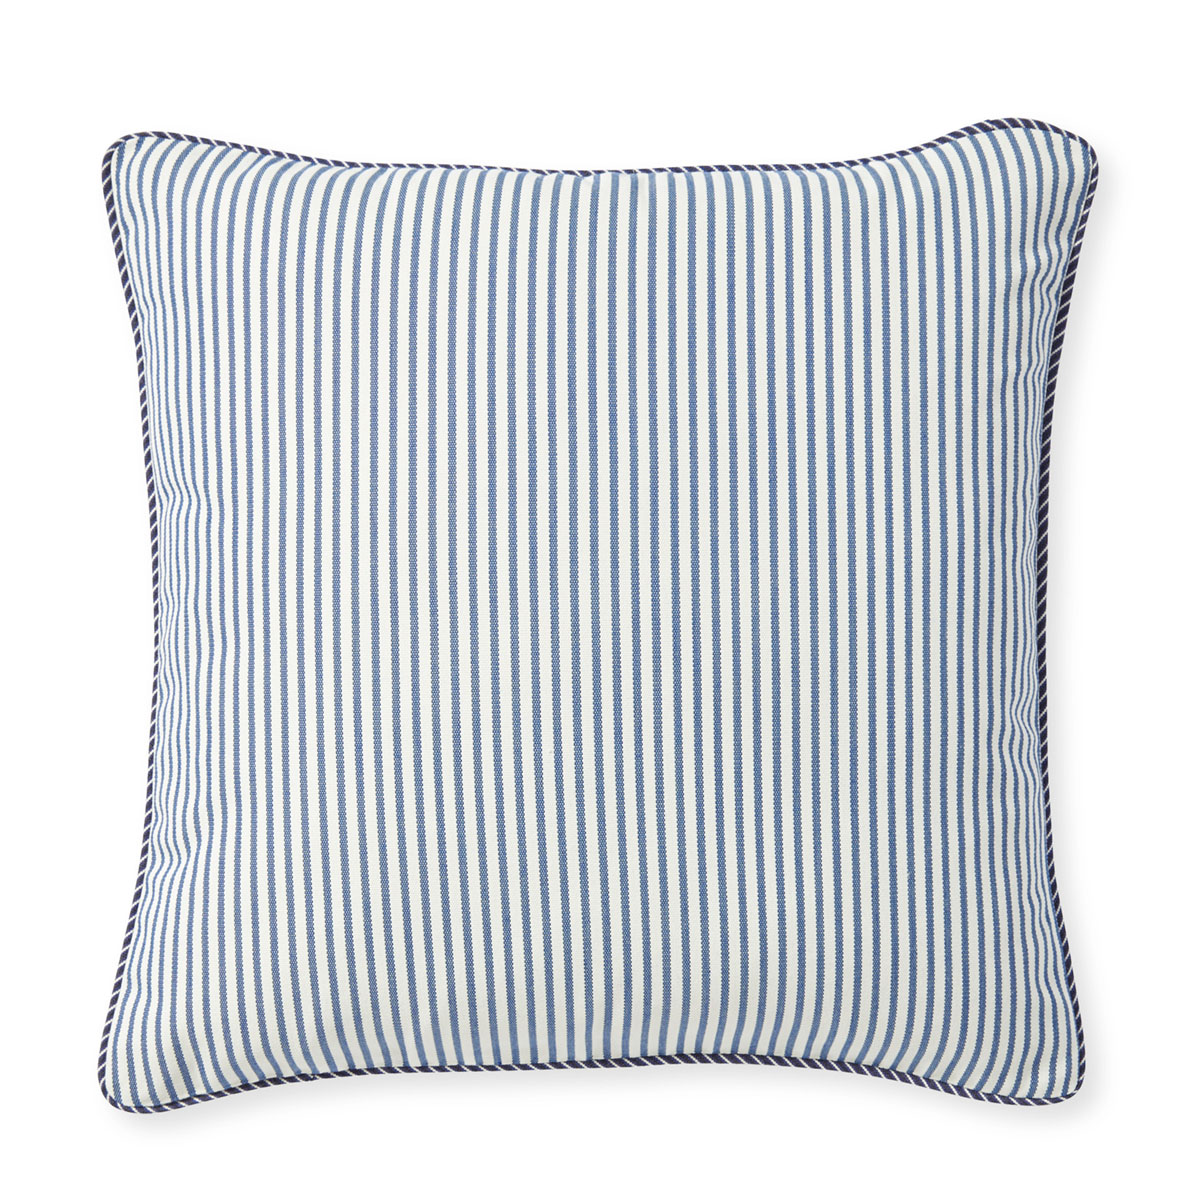 serena and lilly stripe blue and white pillow piped.jpg